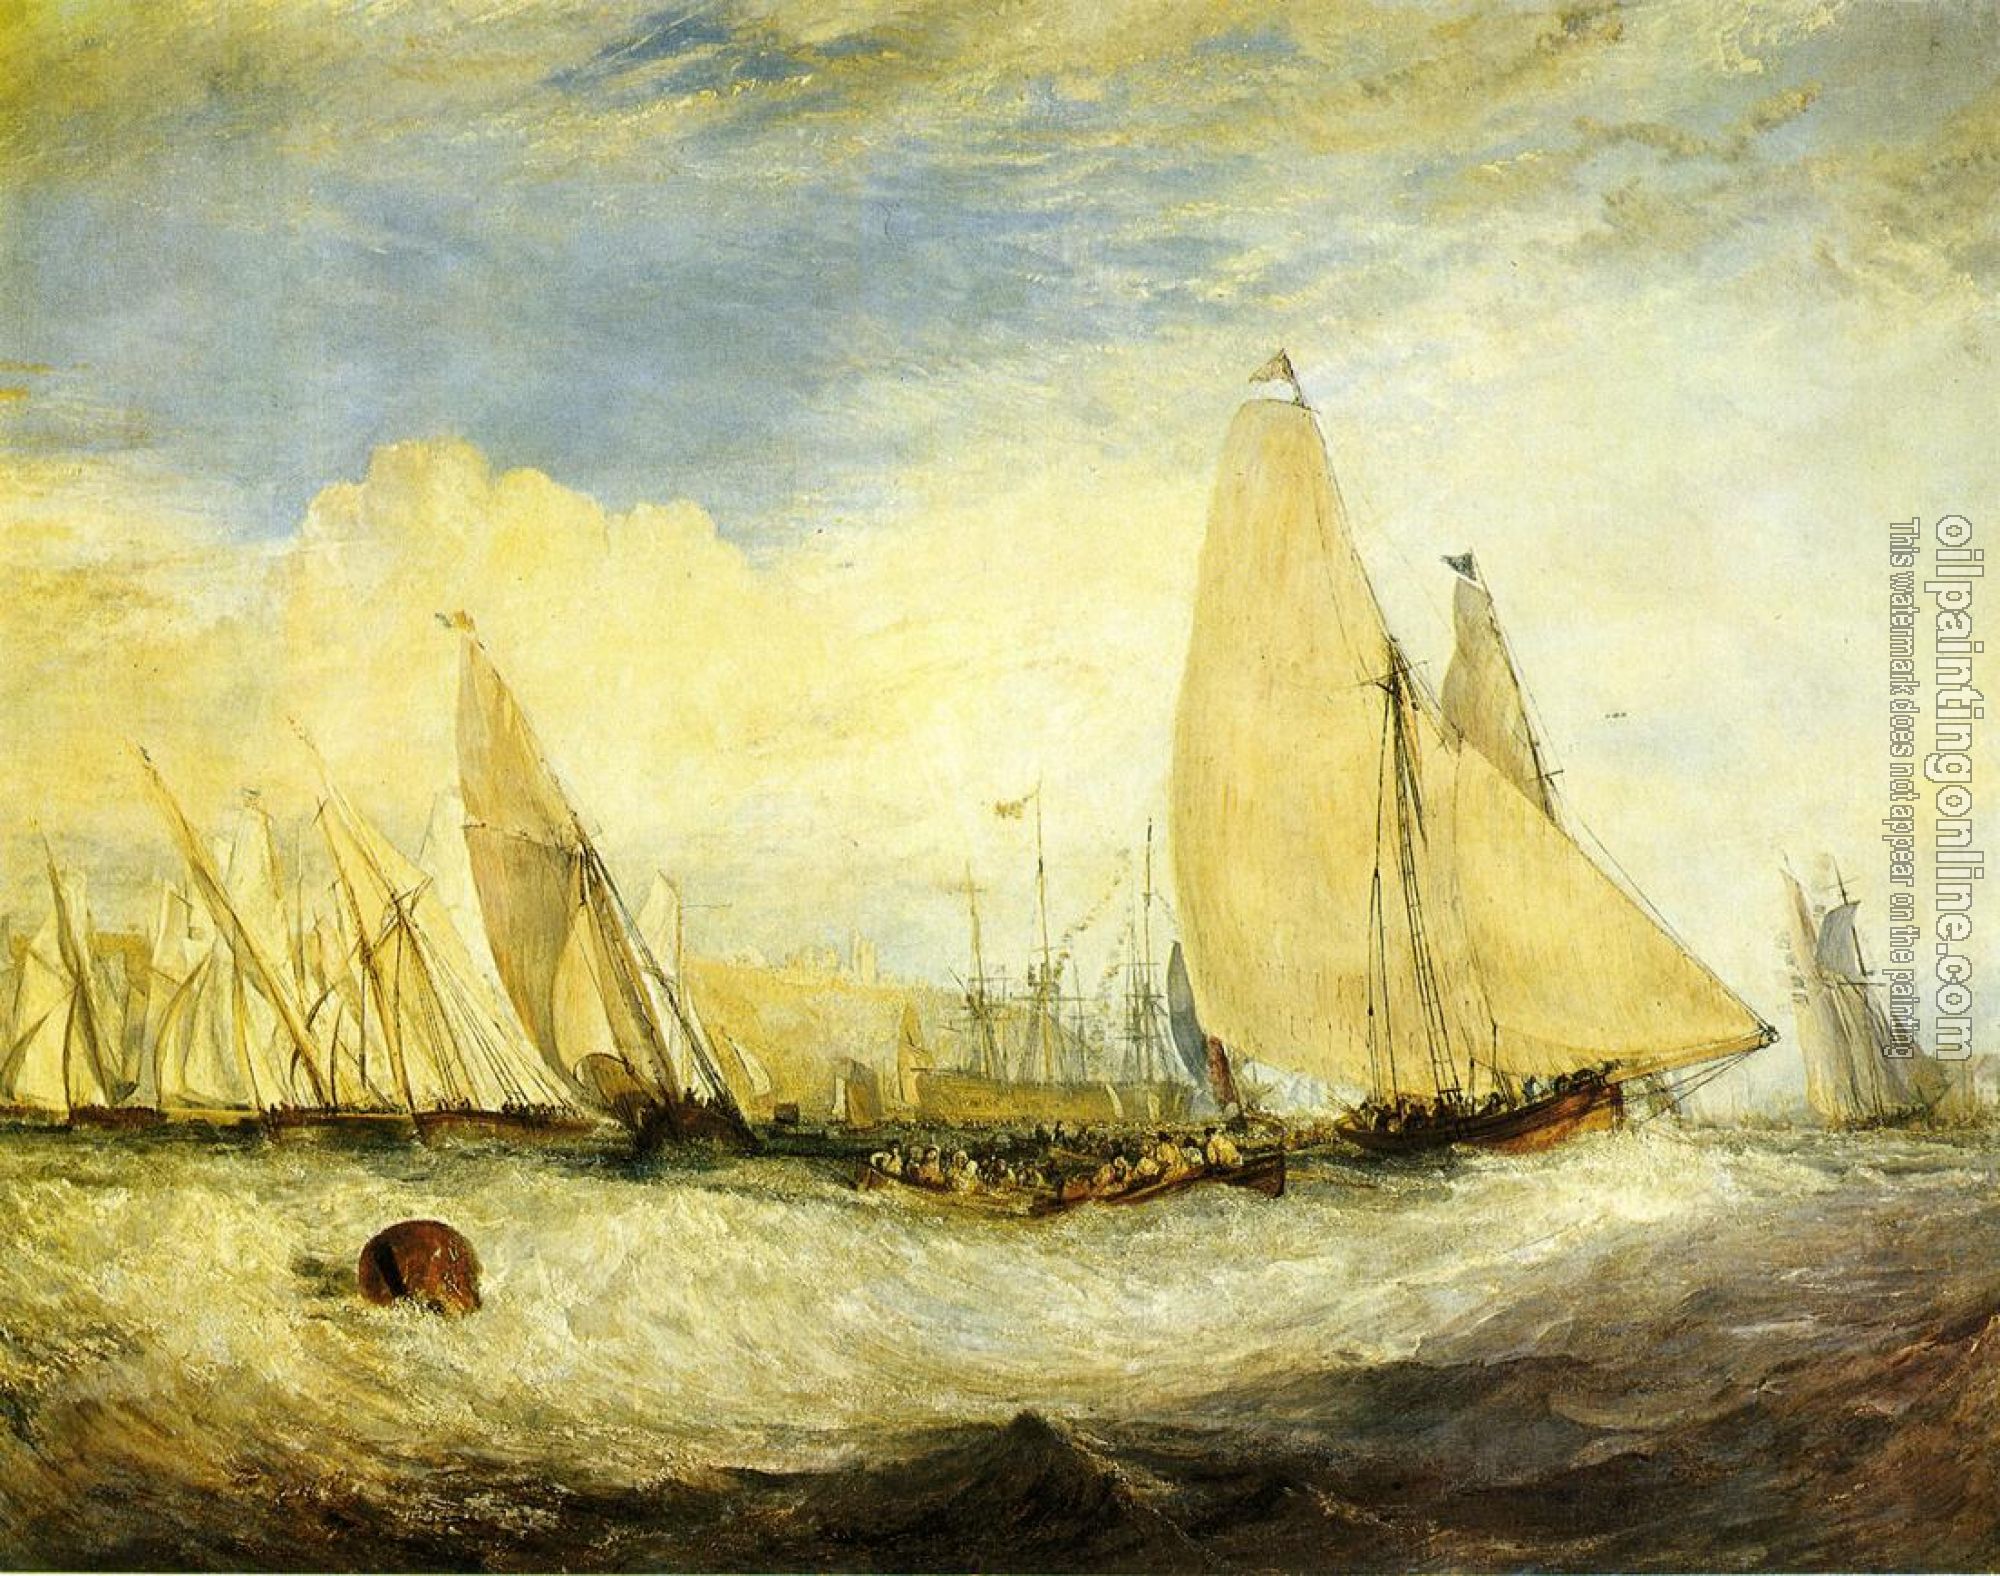 Turner, Joseph Mallord William - East Cowes Castle, the seat of J. Nash, Esq, the Regatta beating to windward